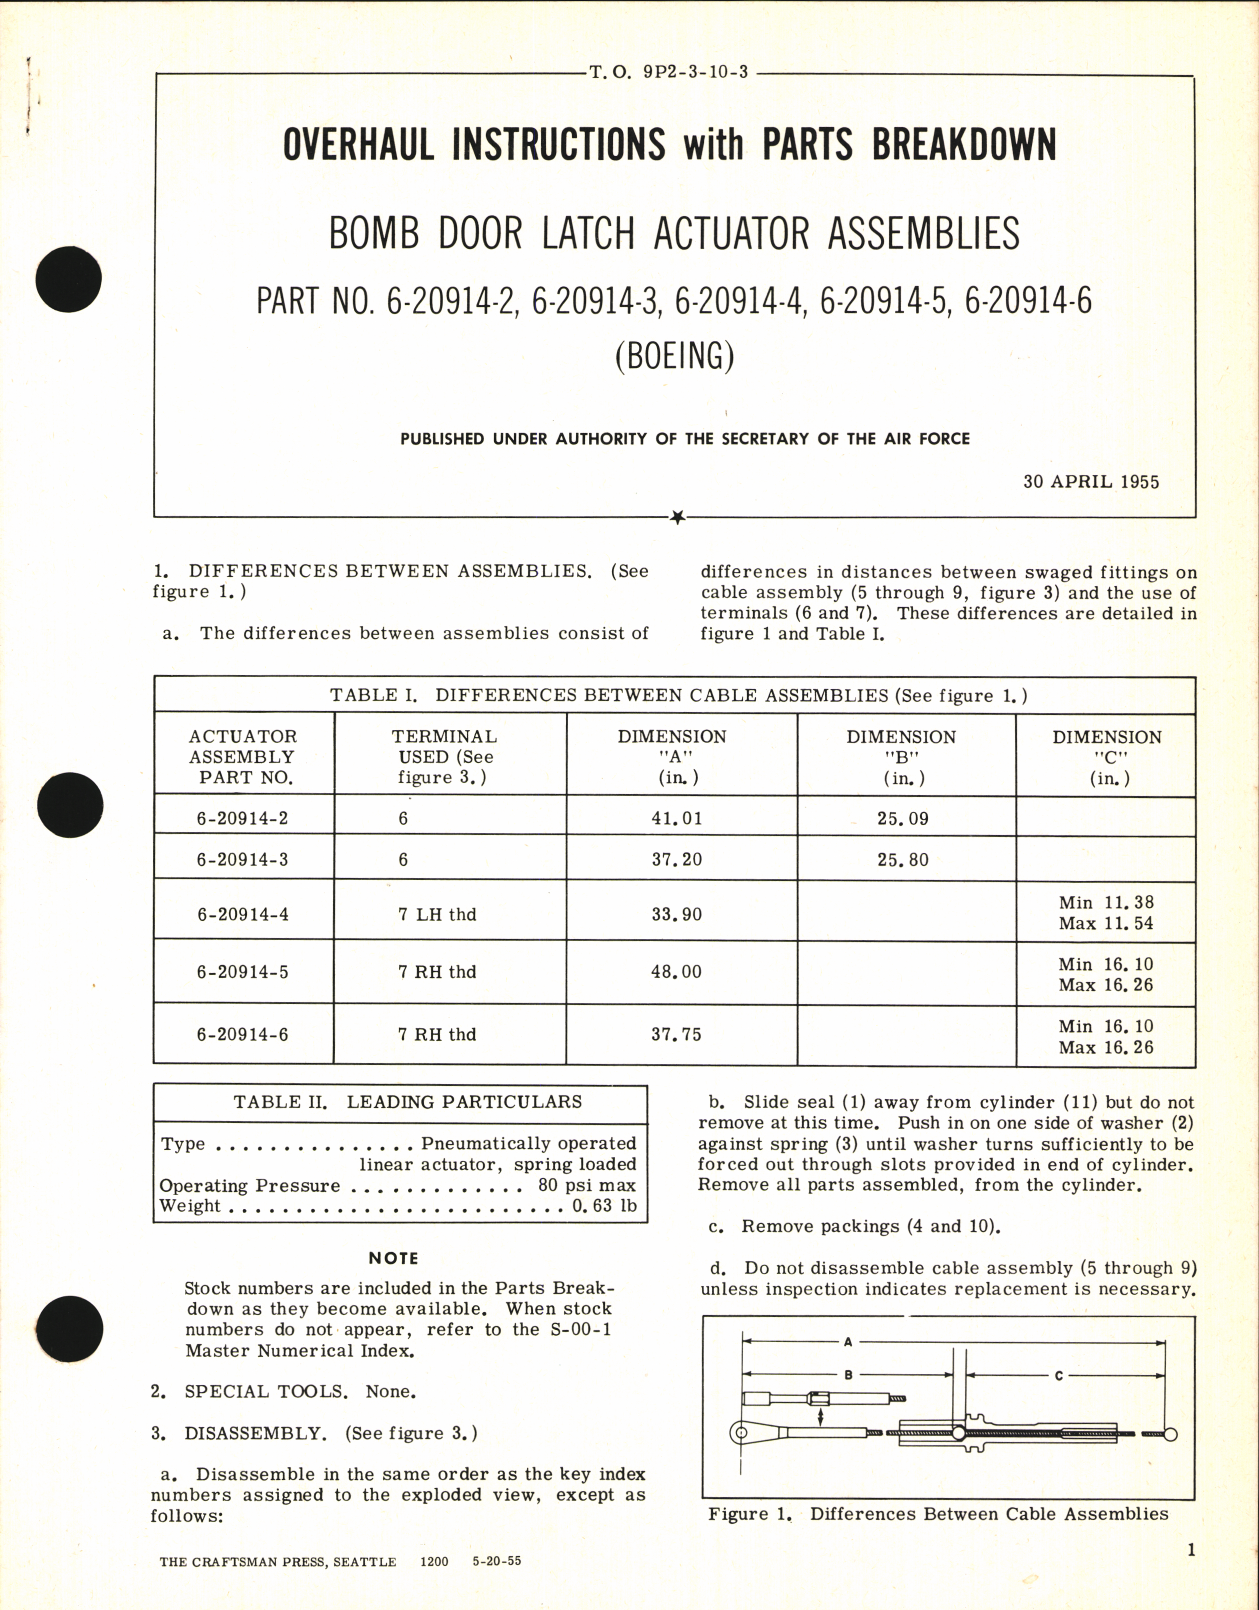 Sample page 1 from AirCorps Library document: Overhaul Instructions with Parts Breakdown for Bomb Door Latch Actuator Assemblies